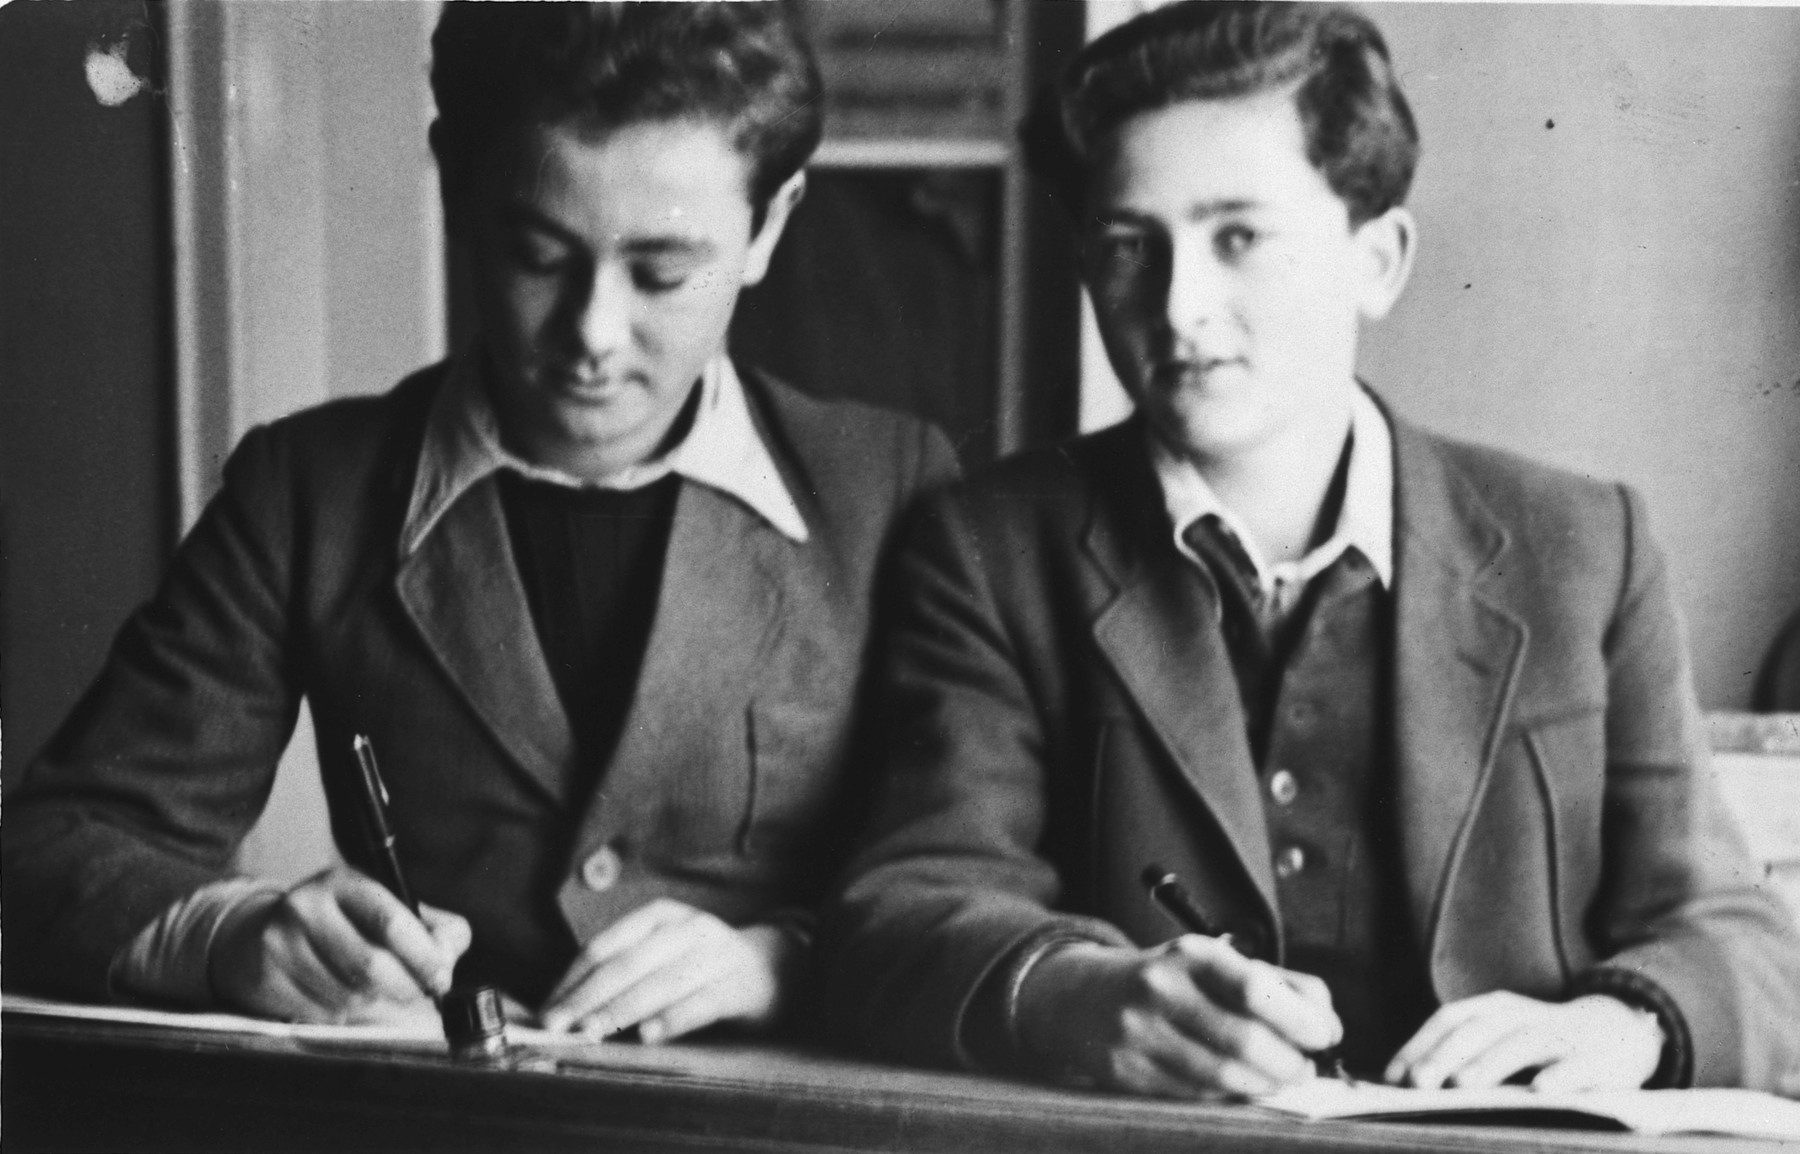 Two school boys work at their desk in the Stuttgart displaced persons camp.

Lova Warszawczyk is on the left; Jack Krampf is on the right.